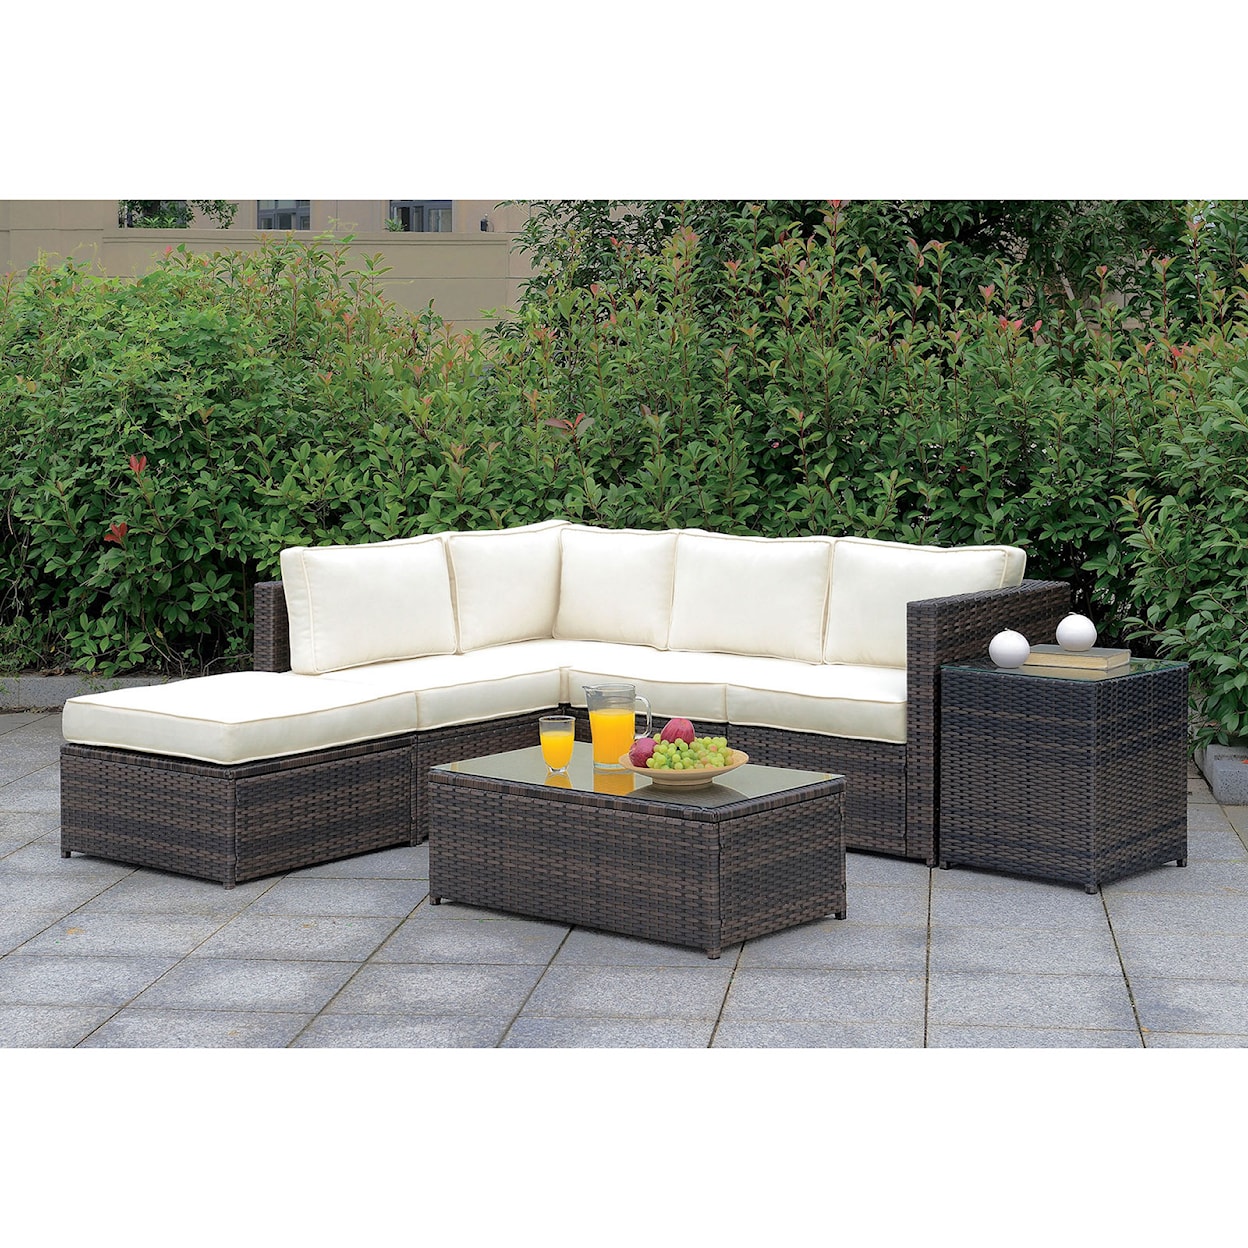 Furniture of America Ilona Outdoor Sectional Set